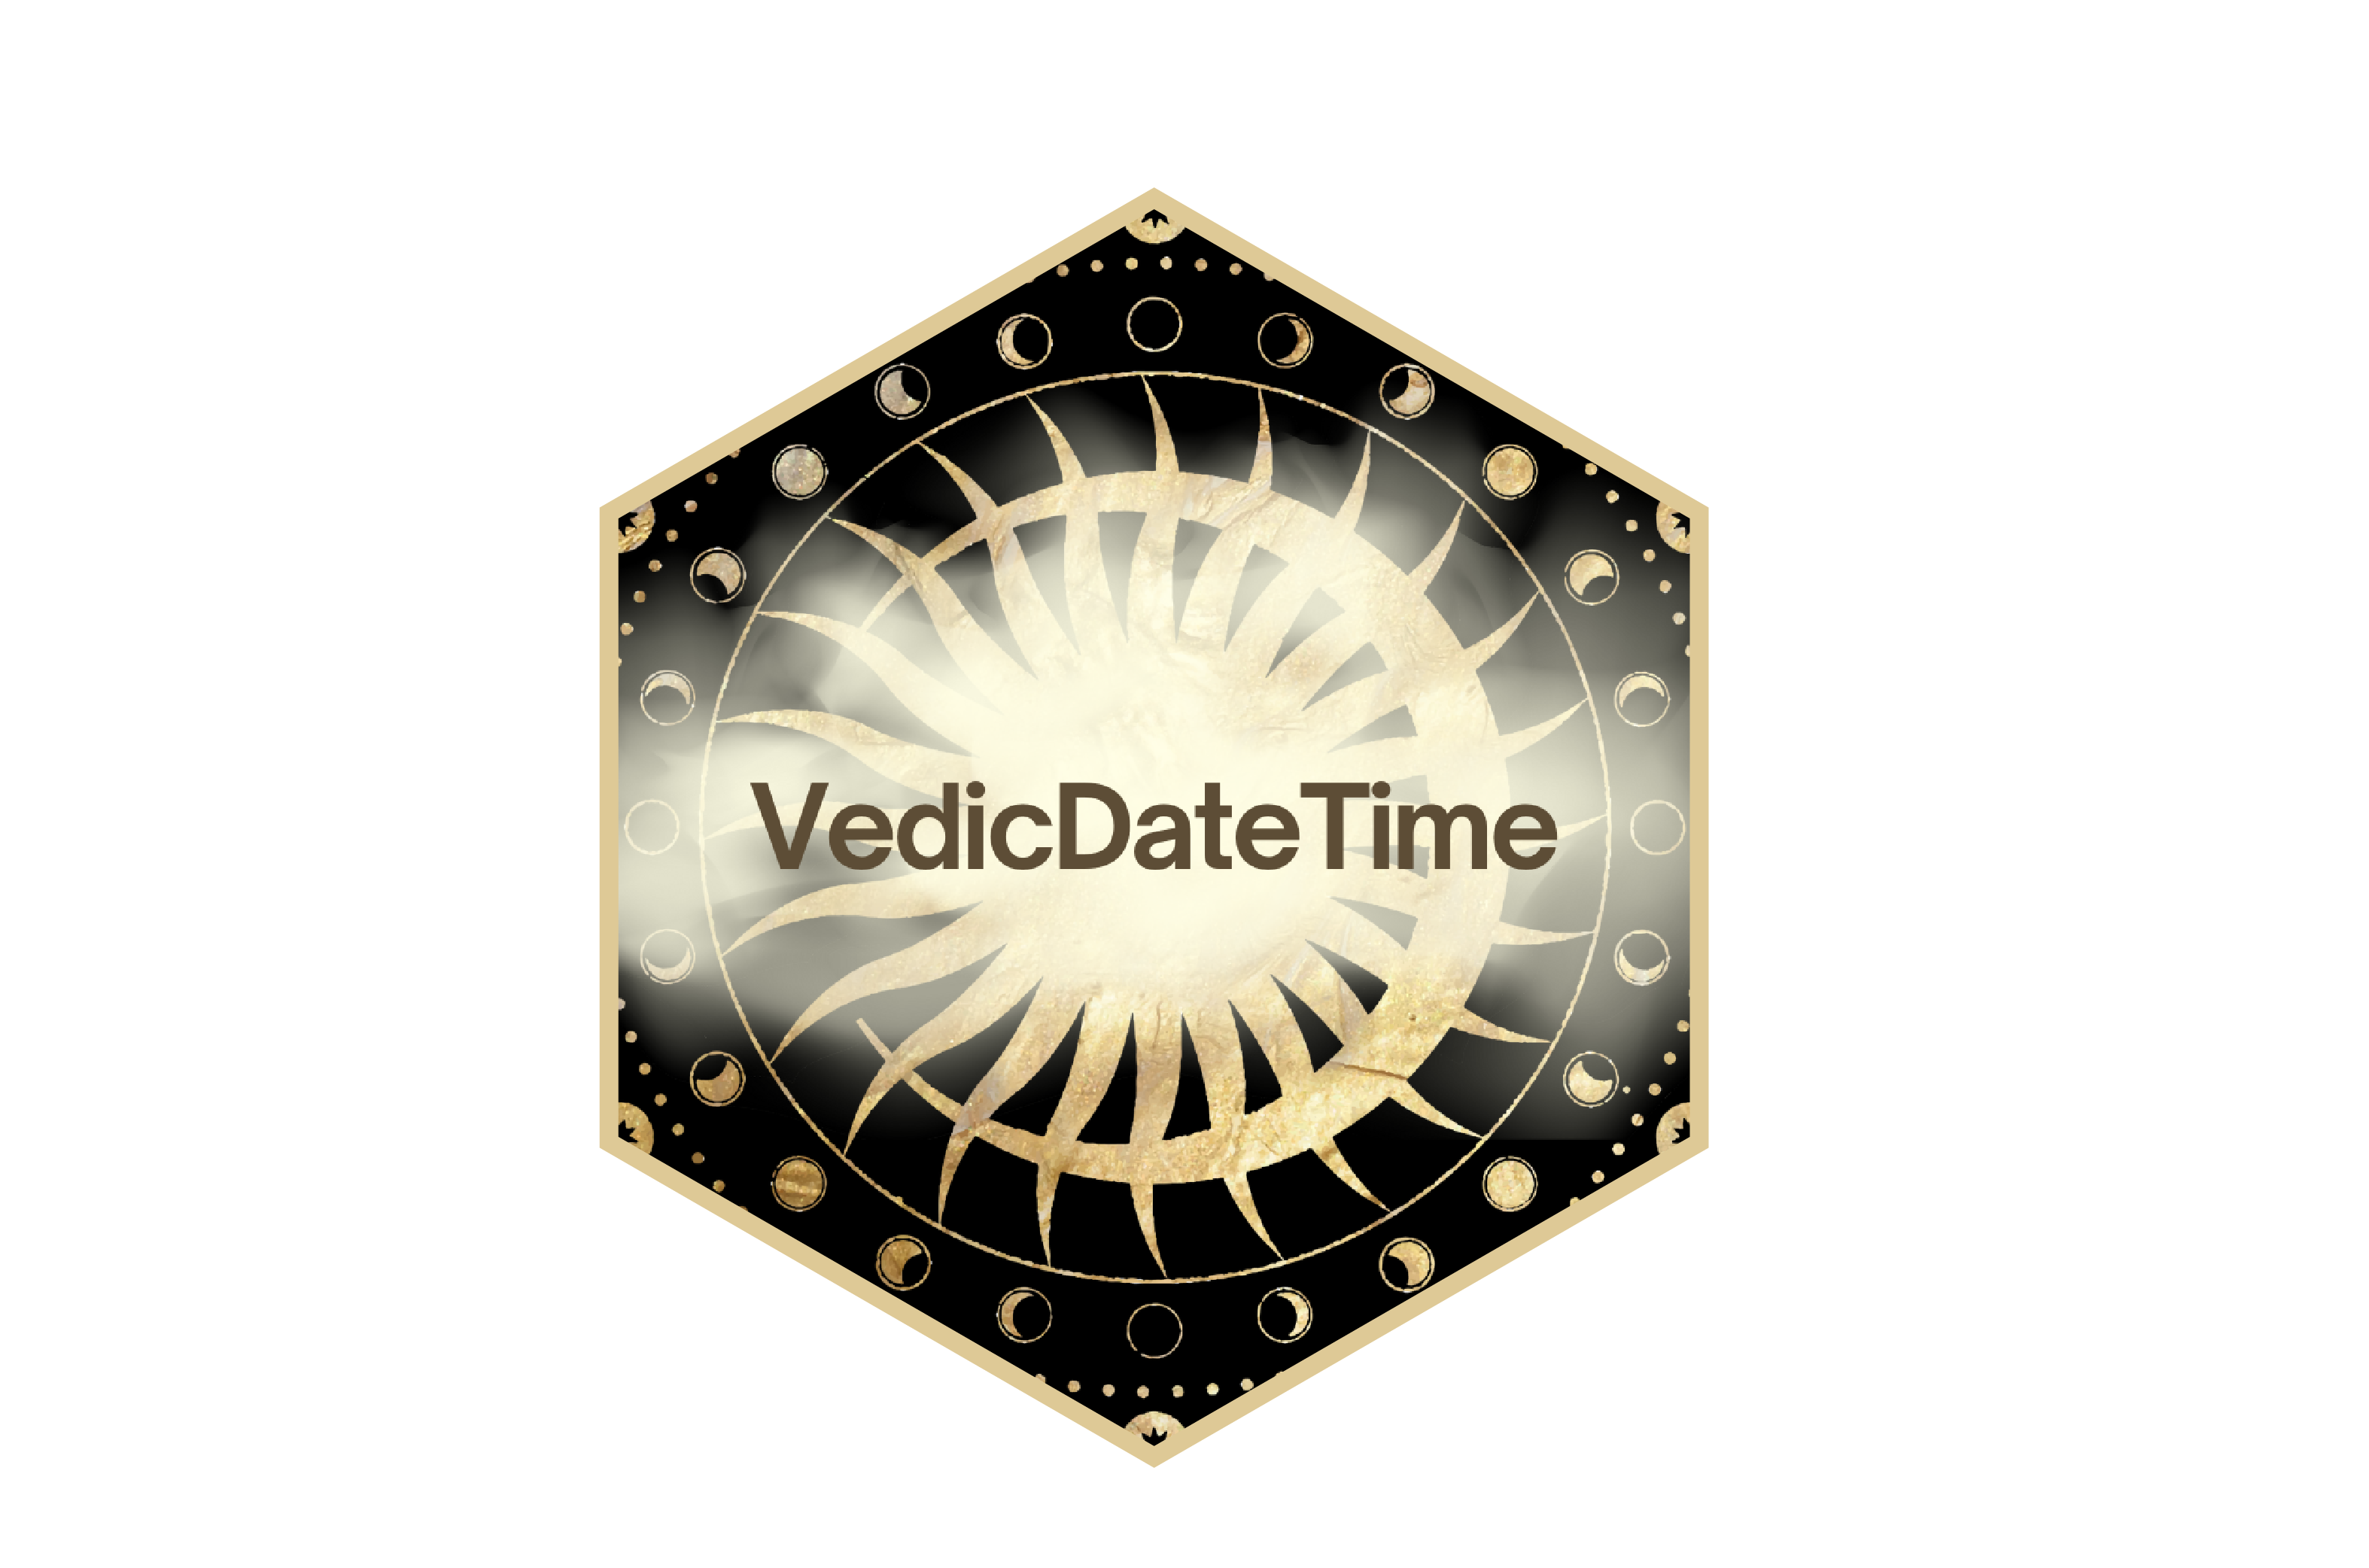 VedicDateTime - An R Package to Implement Vedic Calendar System